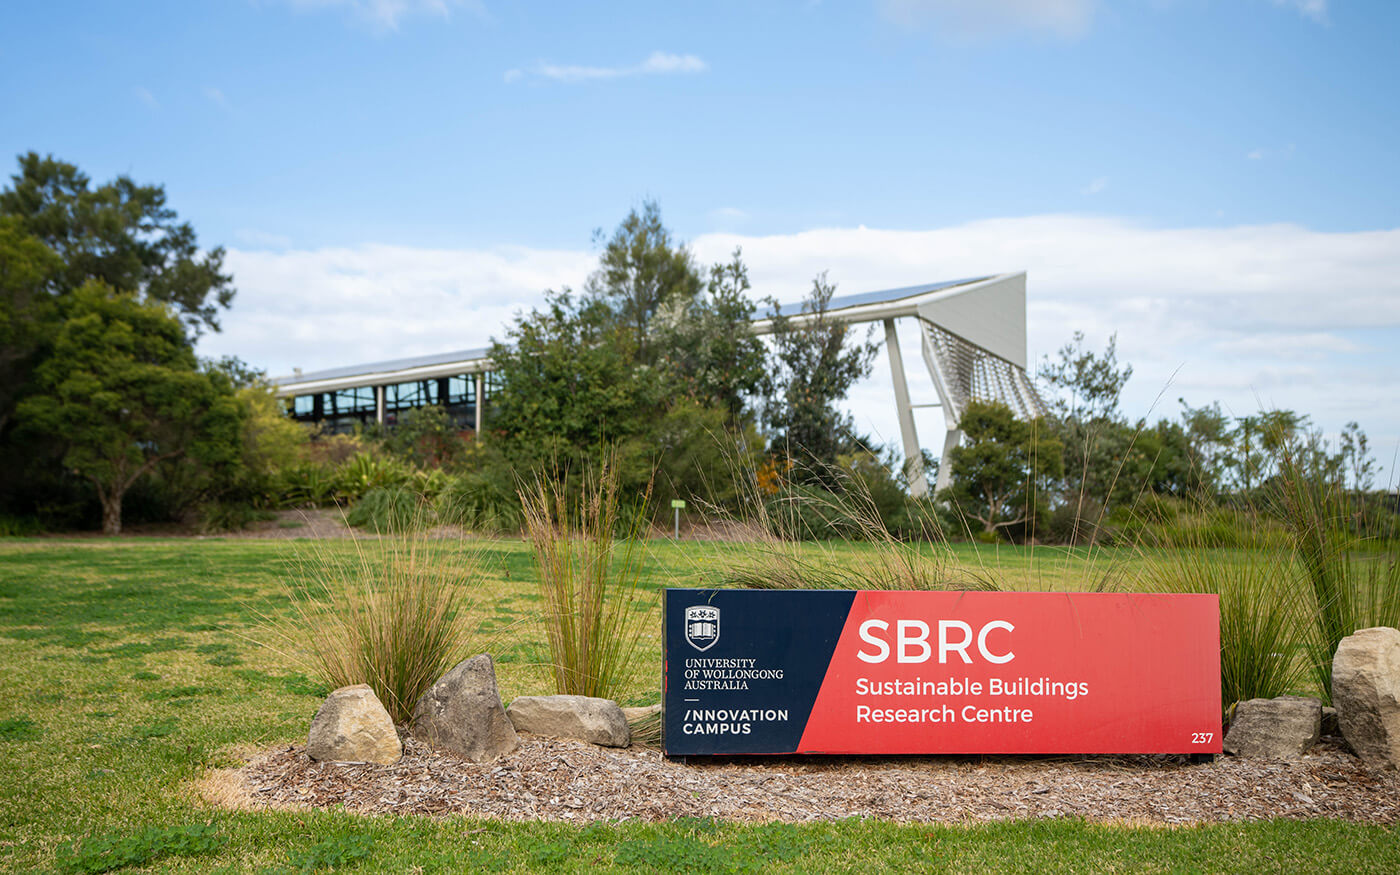 Exterior view of the University of Wollongong's Sustainable Buildings Research Centre